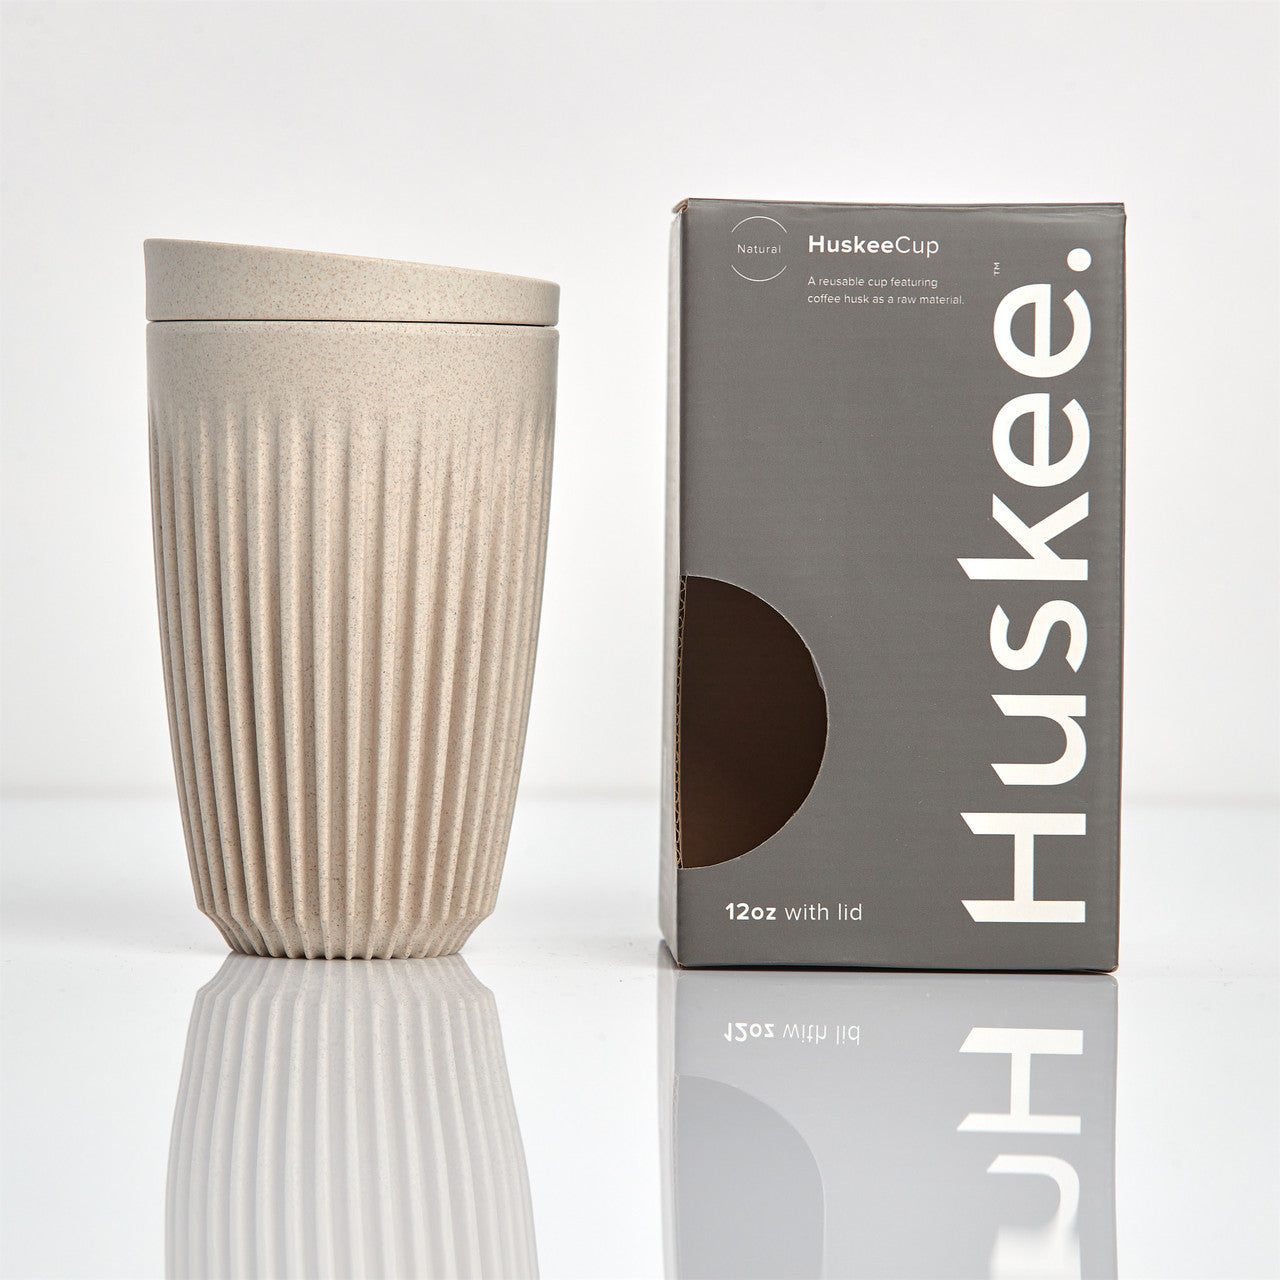 Huskee Cup and Lid combo - 12oz Natural